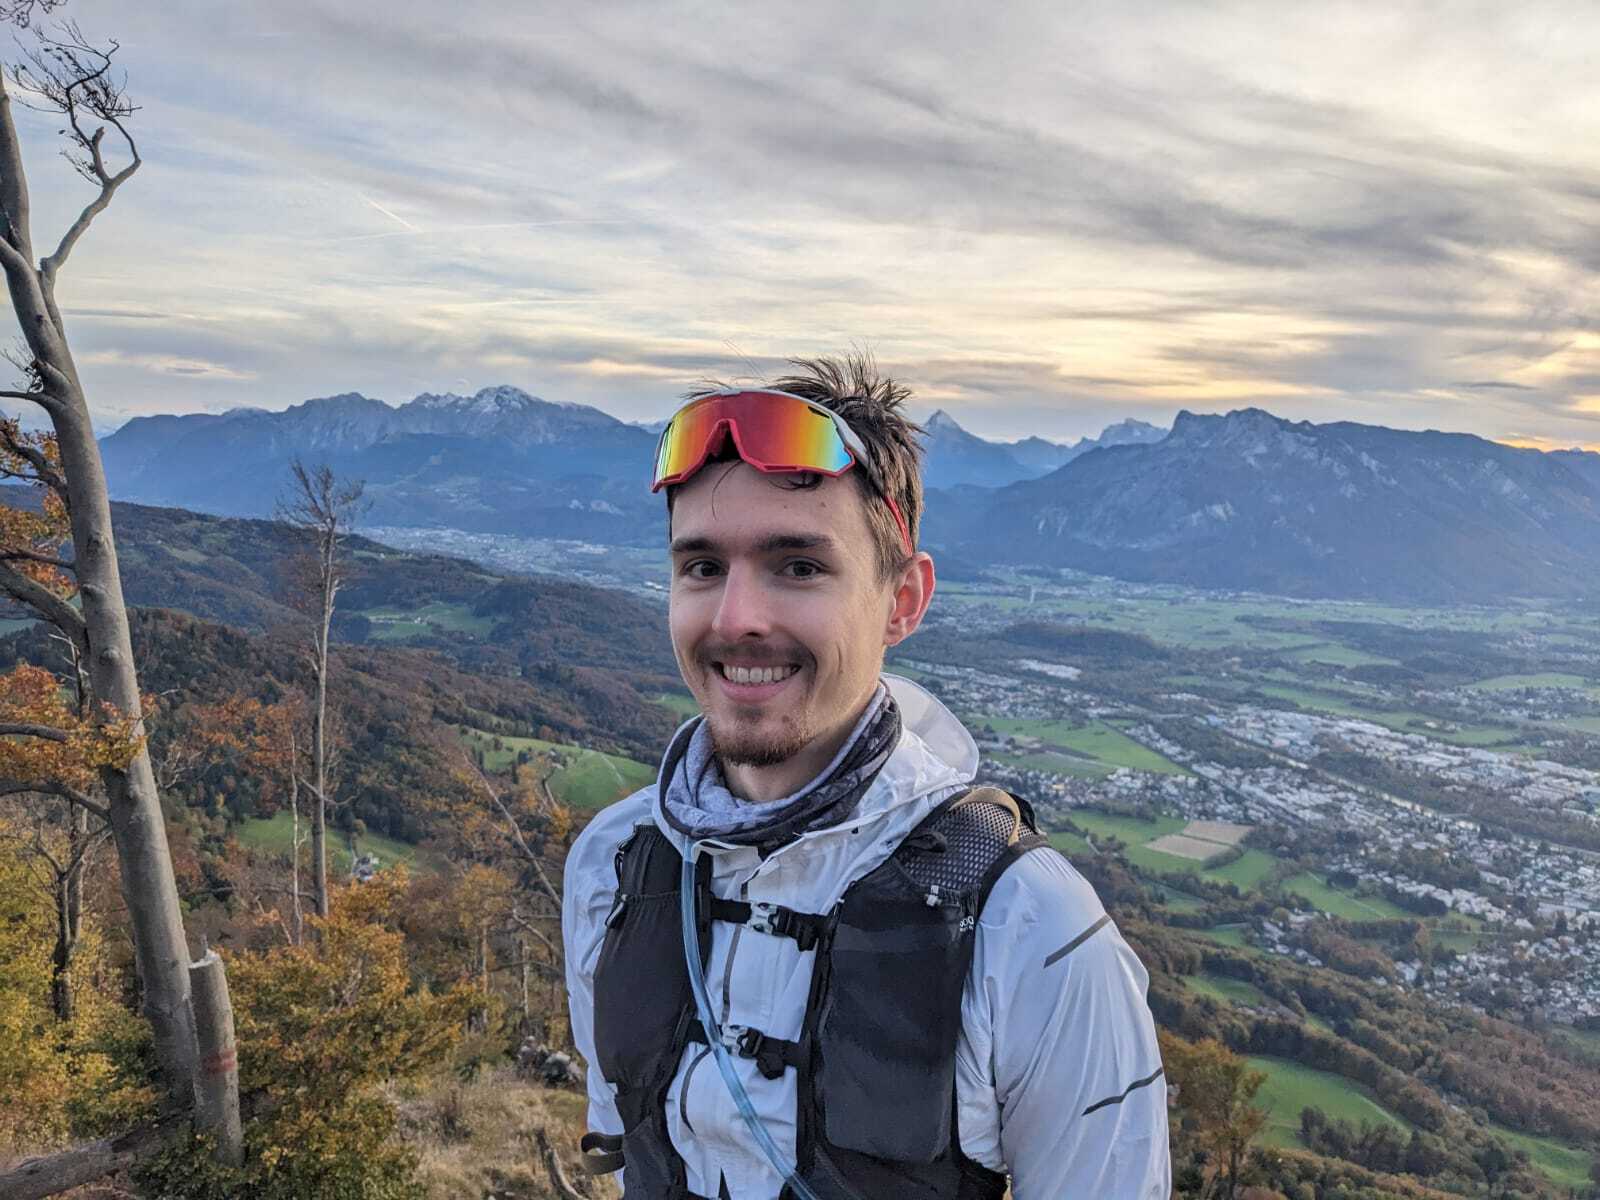 A person smiling towards the camera with a mountain landscape behind them.